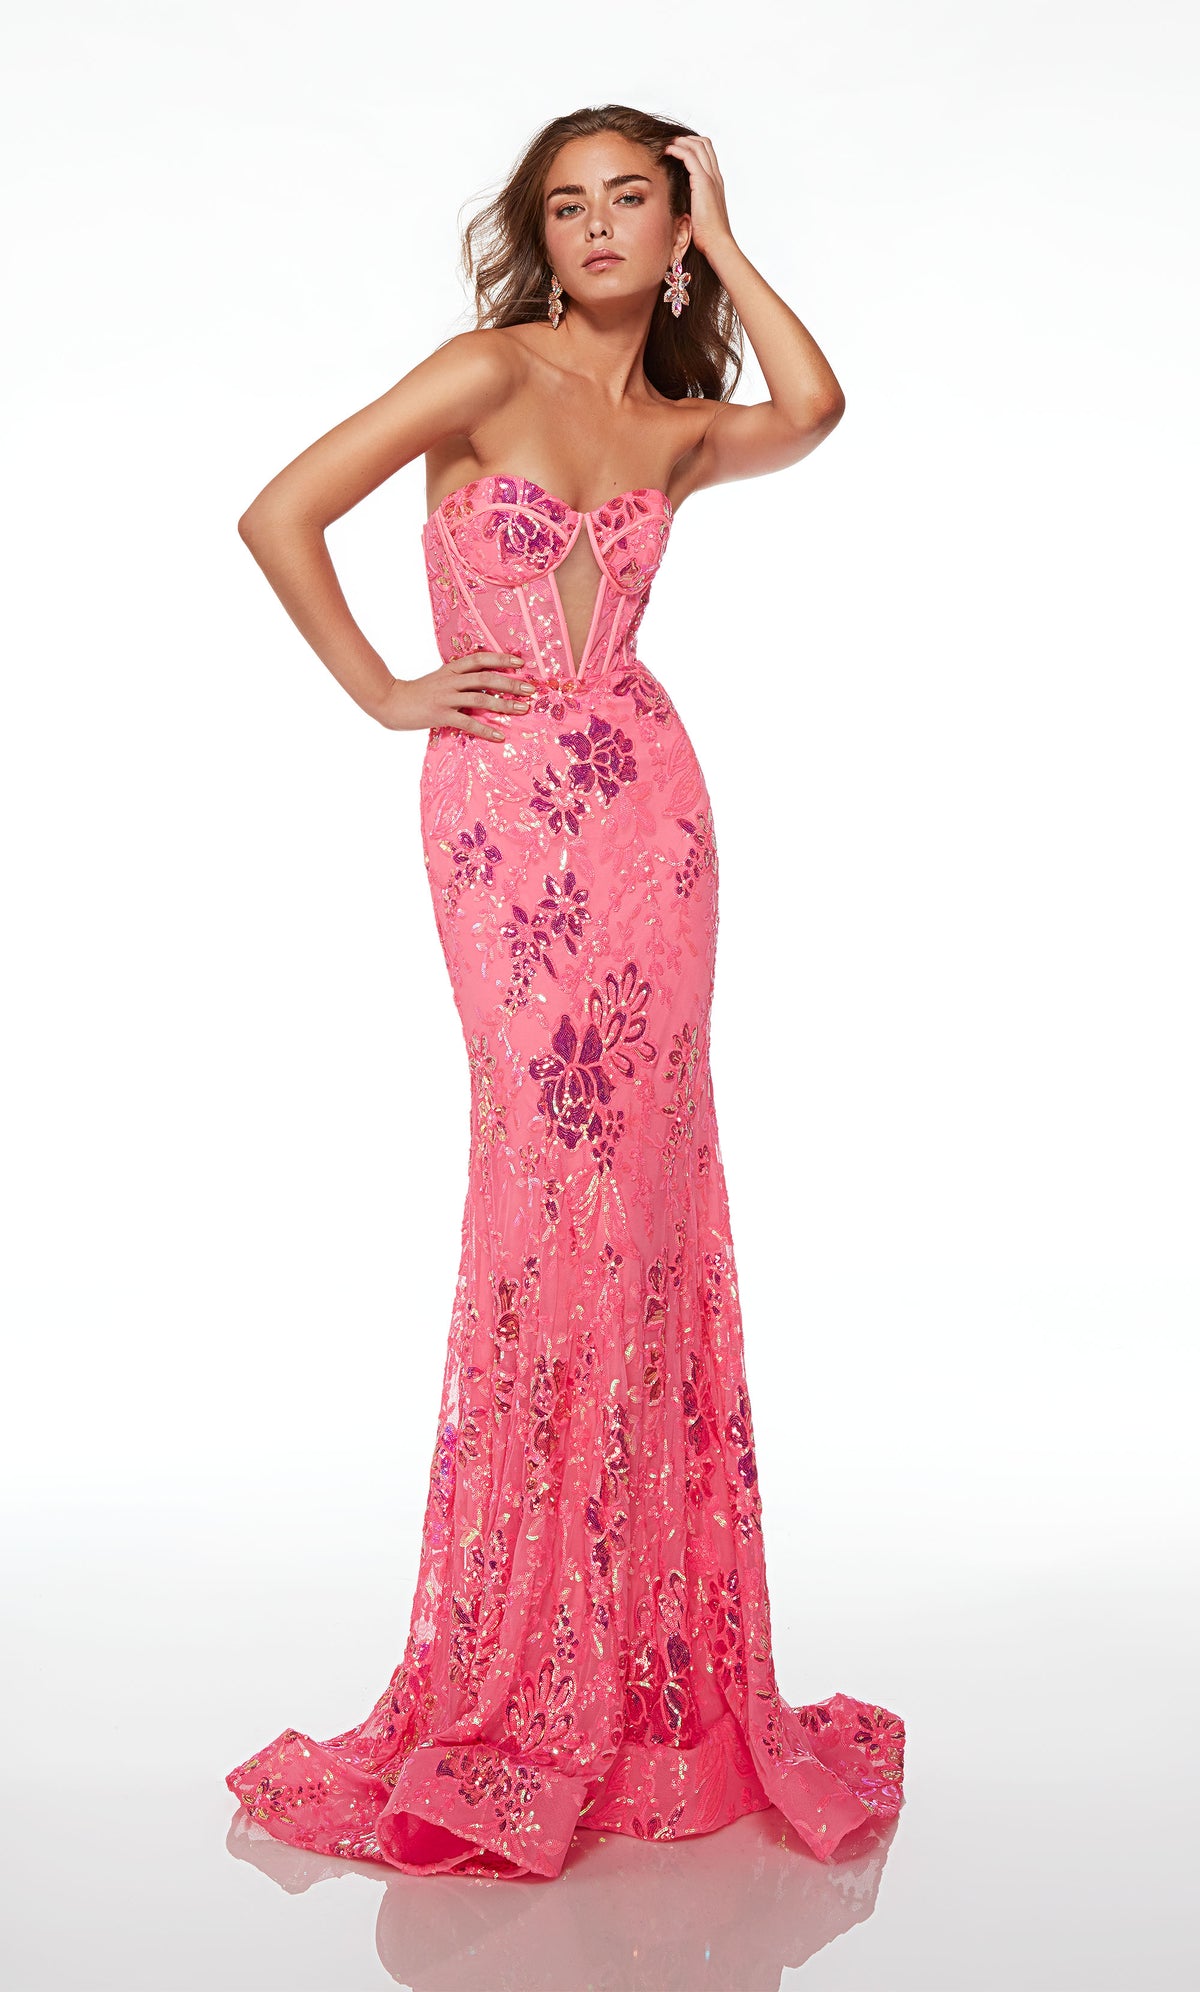 Strapless neon pink prom dress featuring an diamond keyhole corset top, lace-up back, train, and iridescent floral sequin designs for an captivating and elegant look.